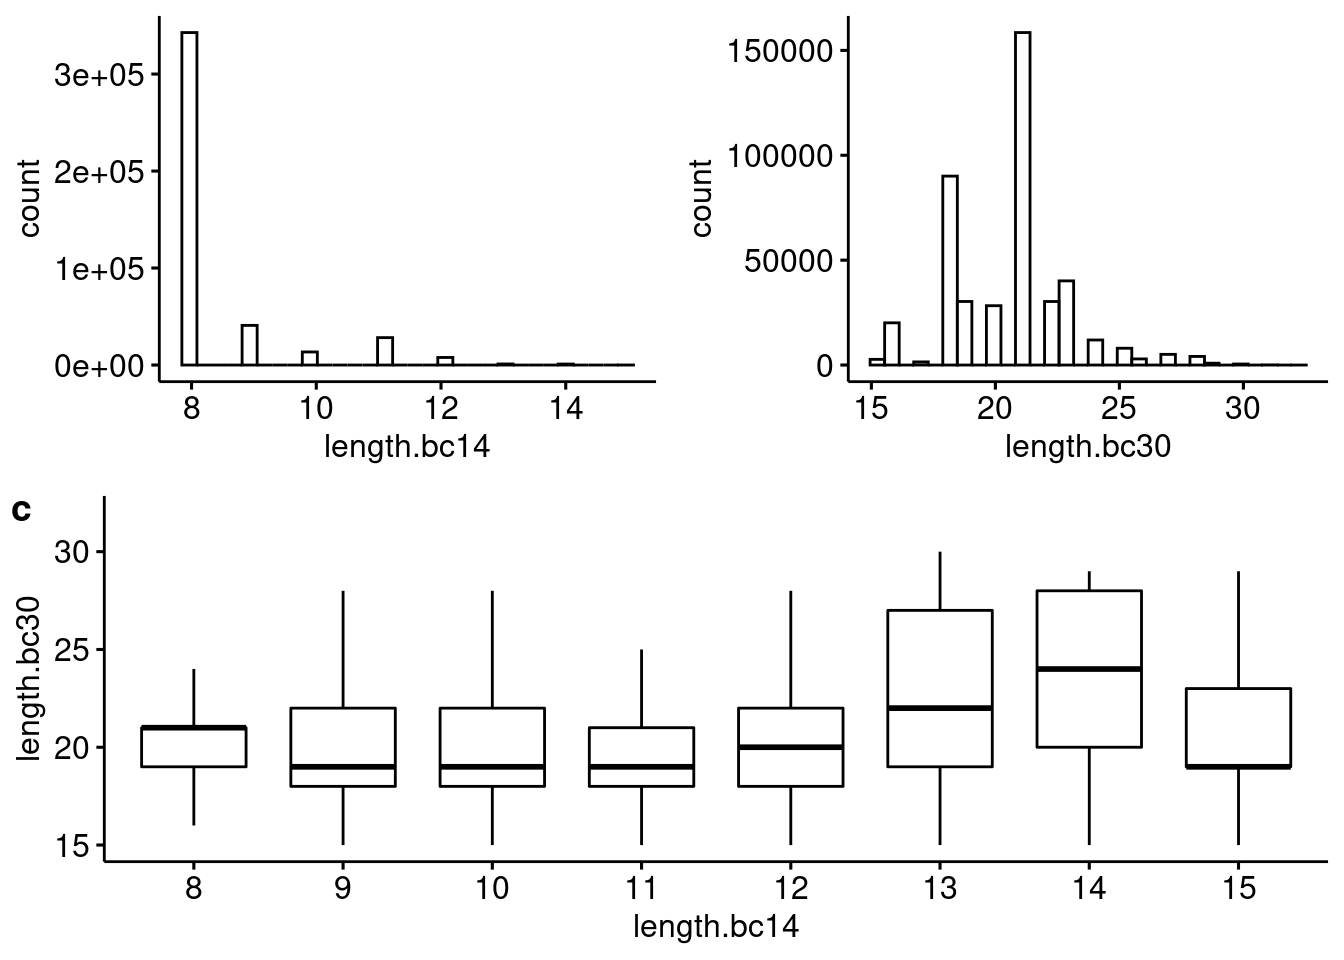 Distribution of (a) bc14 and (b) bc30 blast hit lengths and (c) the relationship between the two across reads.